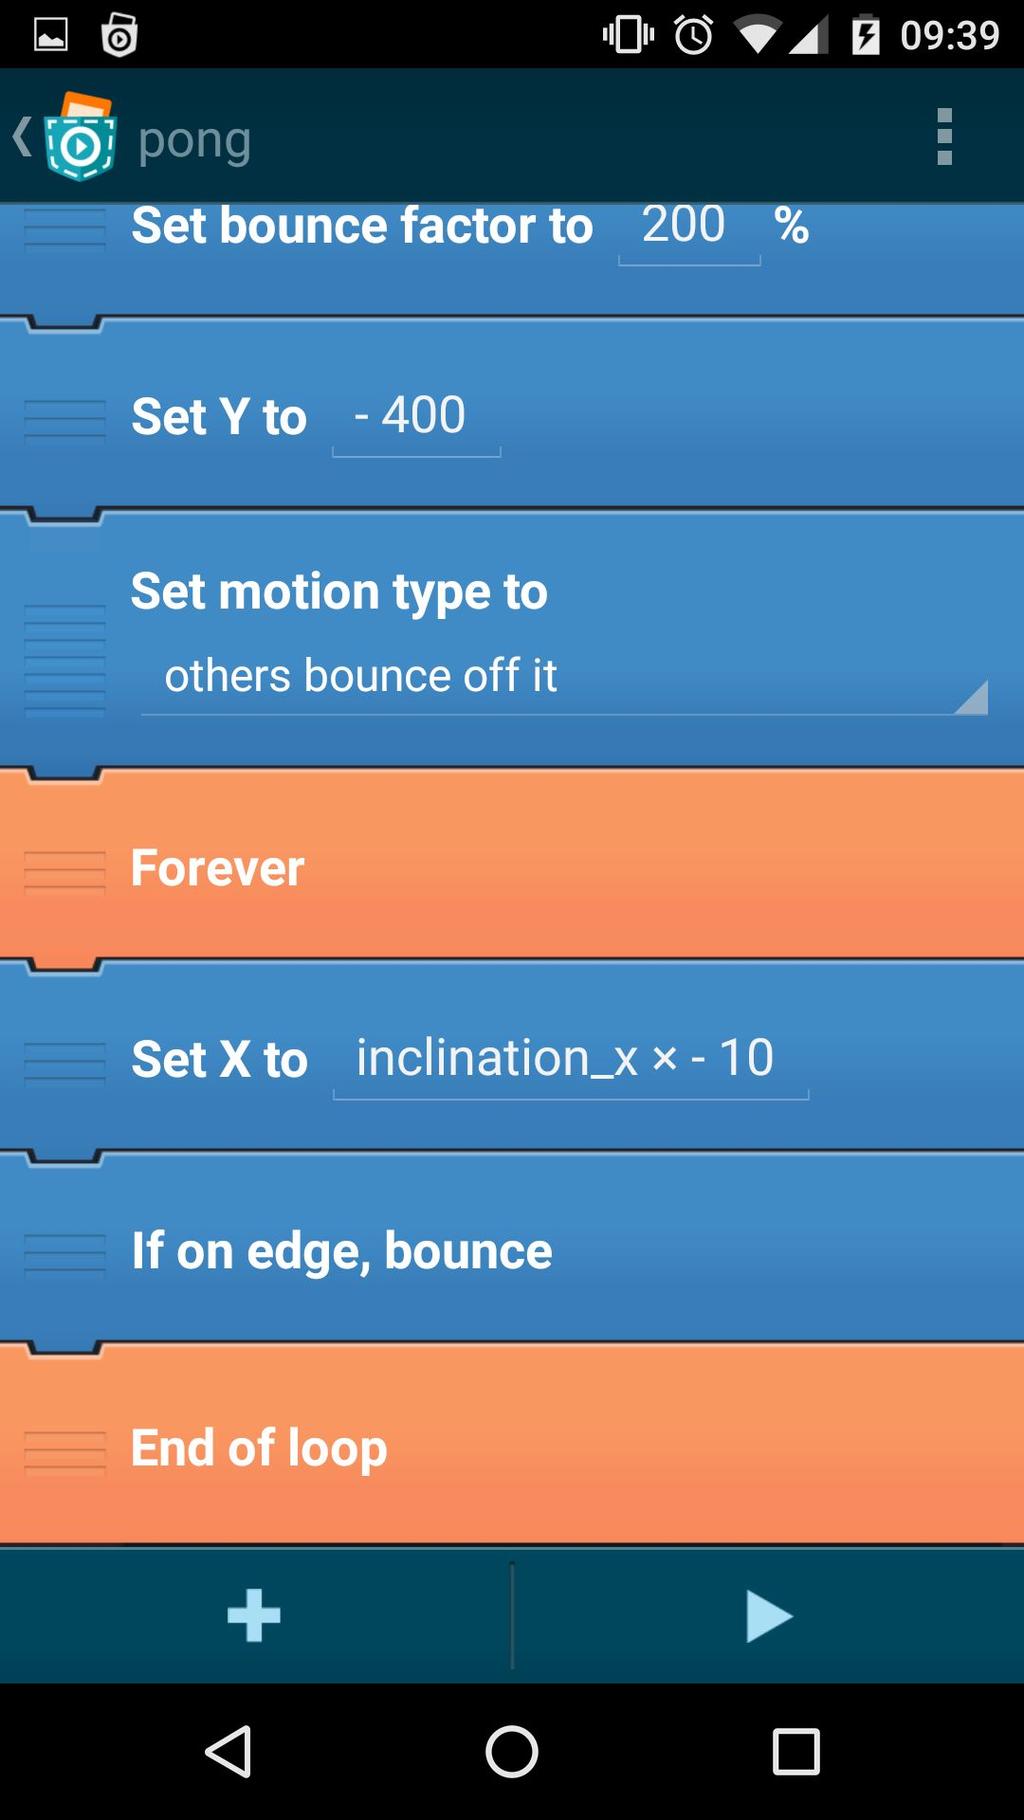 inclination sensors in the formula editor by tapping on Device.